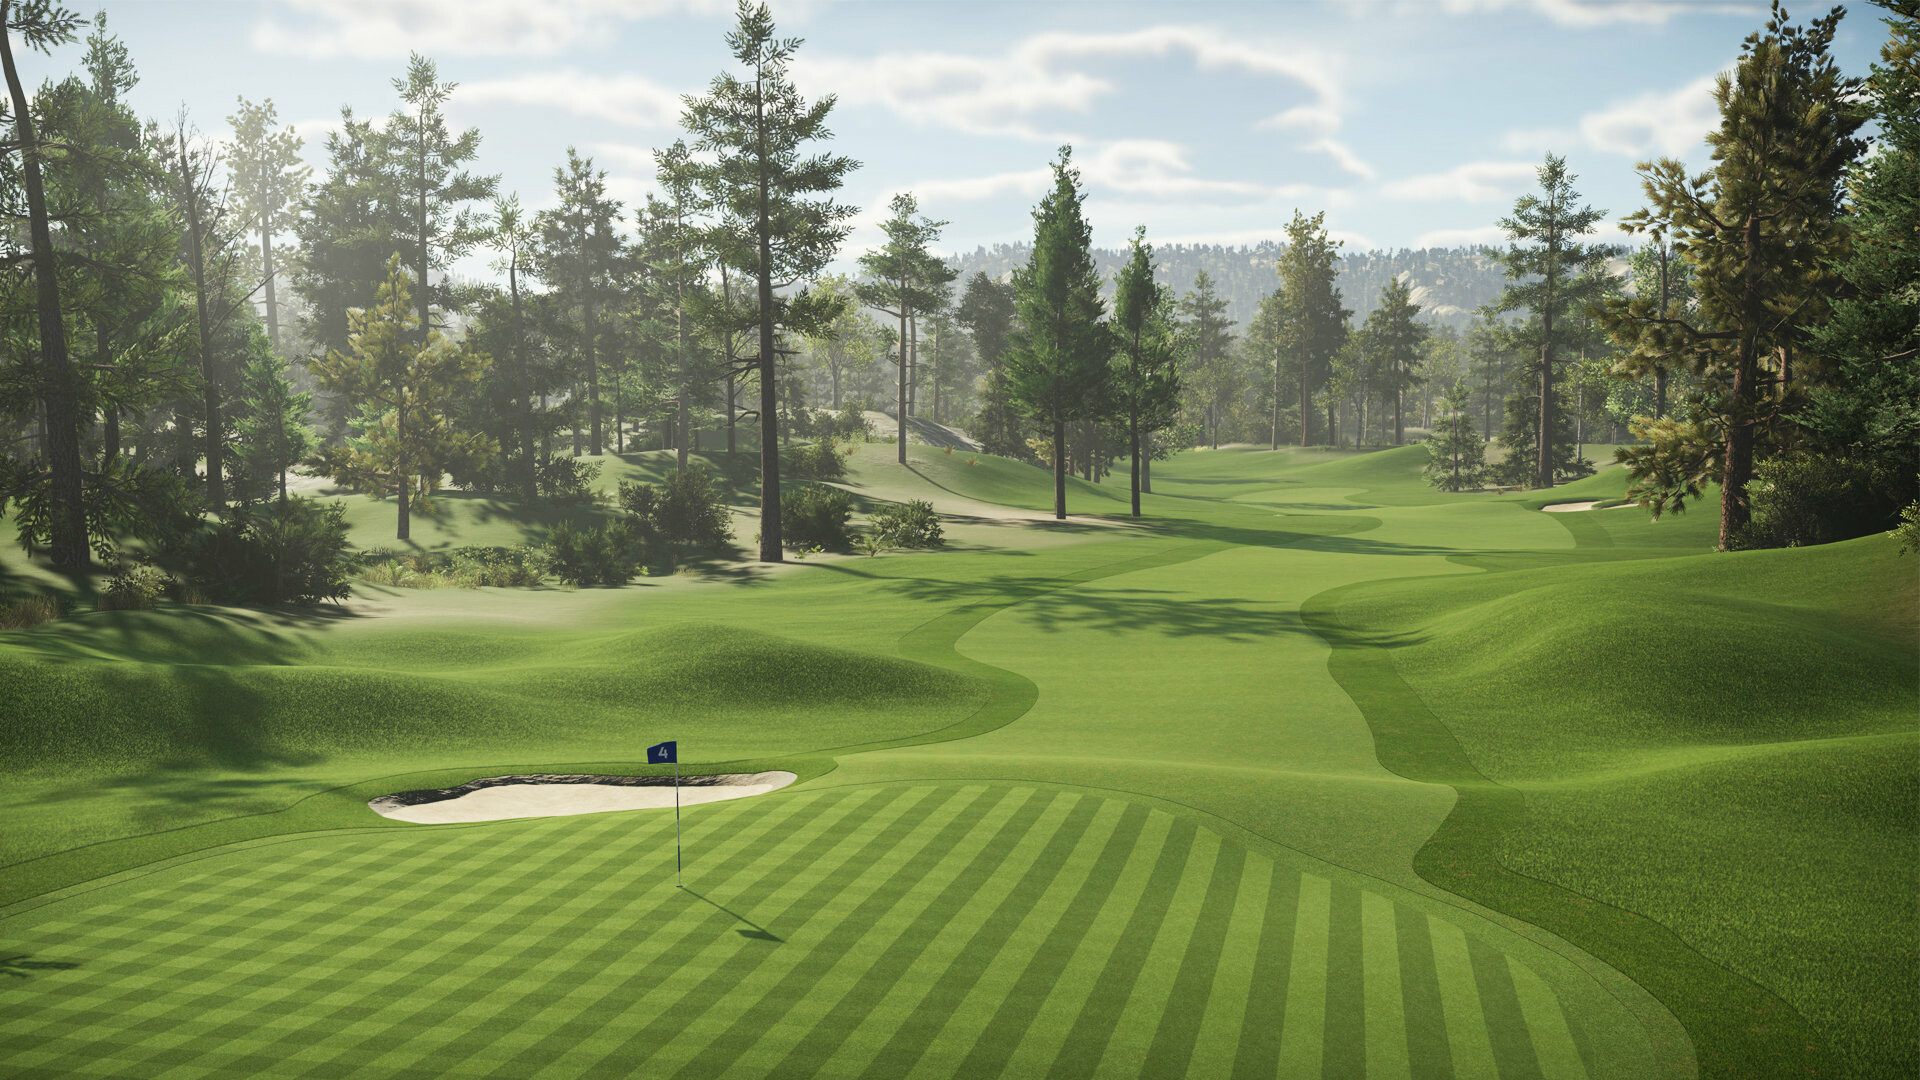 Golf: Course, Sand bunker, 18 or 9 holes that receives the ball. 1920x1080 Full HD Background.